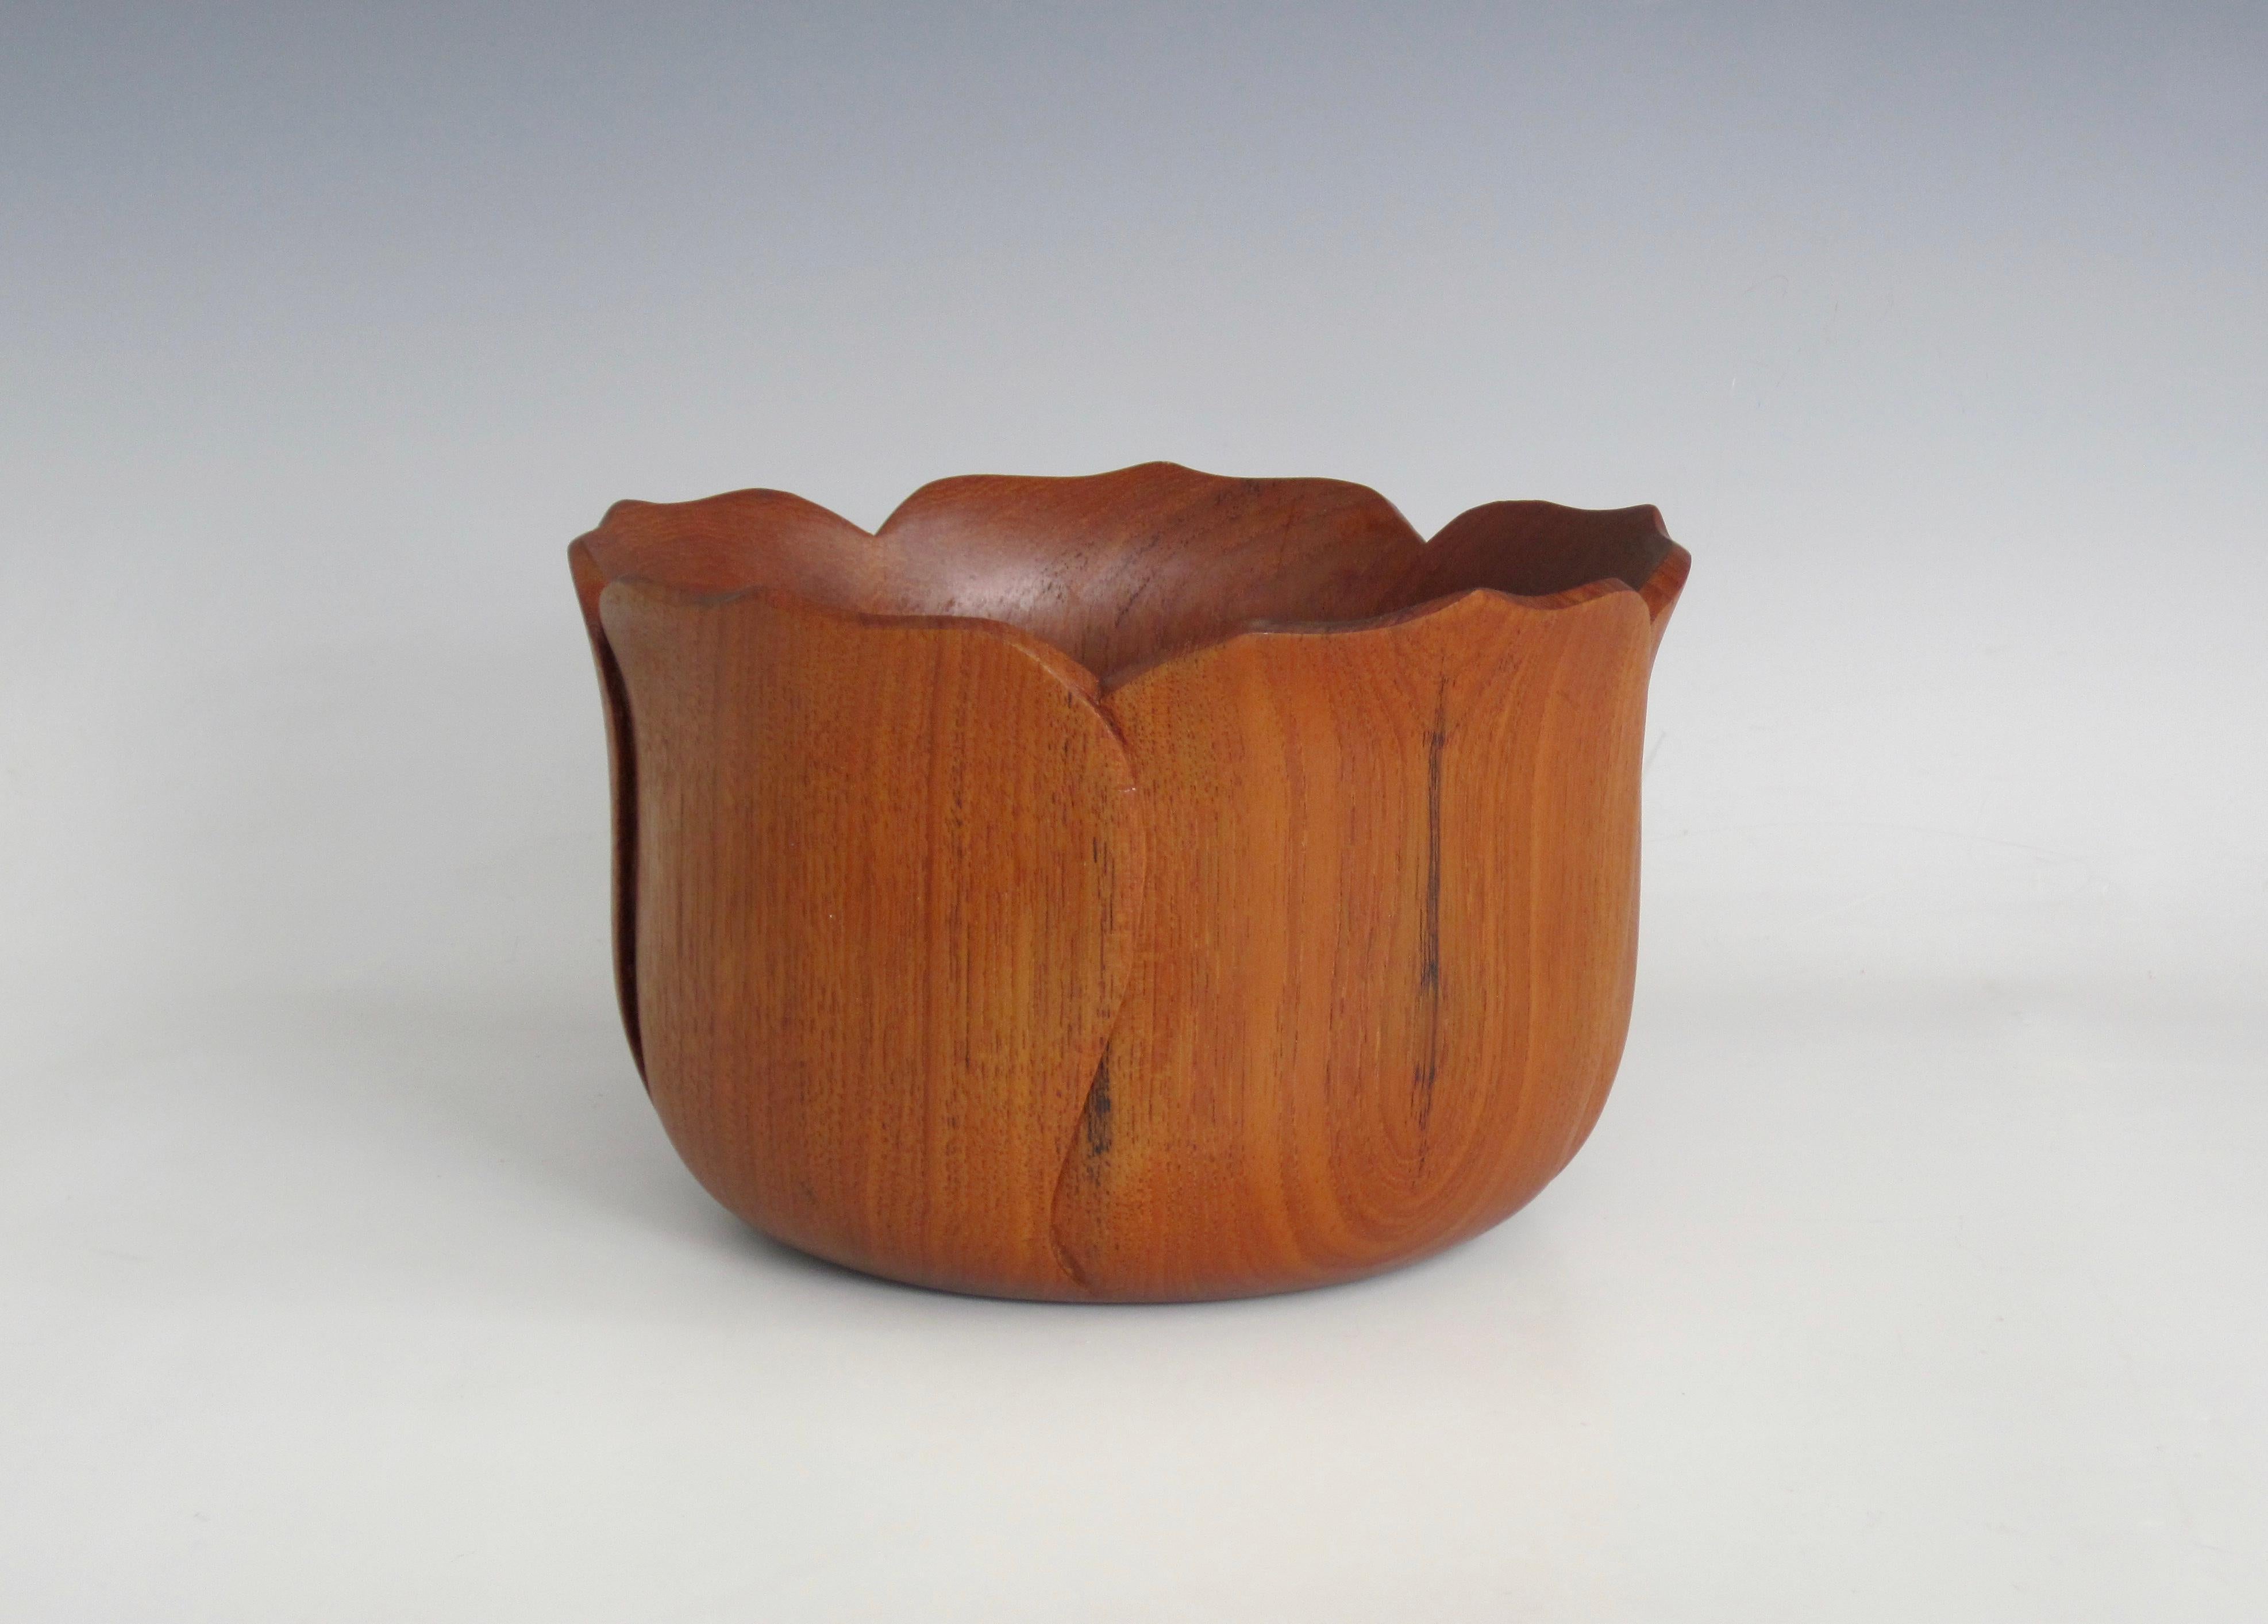 A hand-carved tulip petal shaped teak bowl. I appreciate the handmade curves and the natural wood grain together. It has an earthy feminine essence about it. Lovely for tabletop to hold a myriad of items, display or collection.